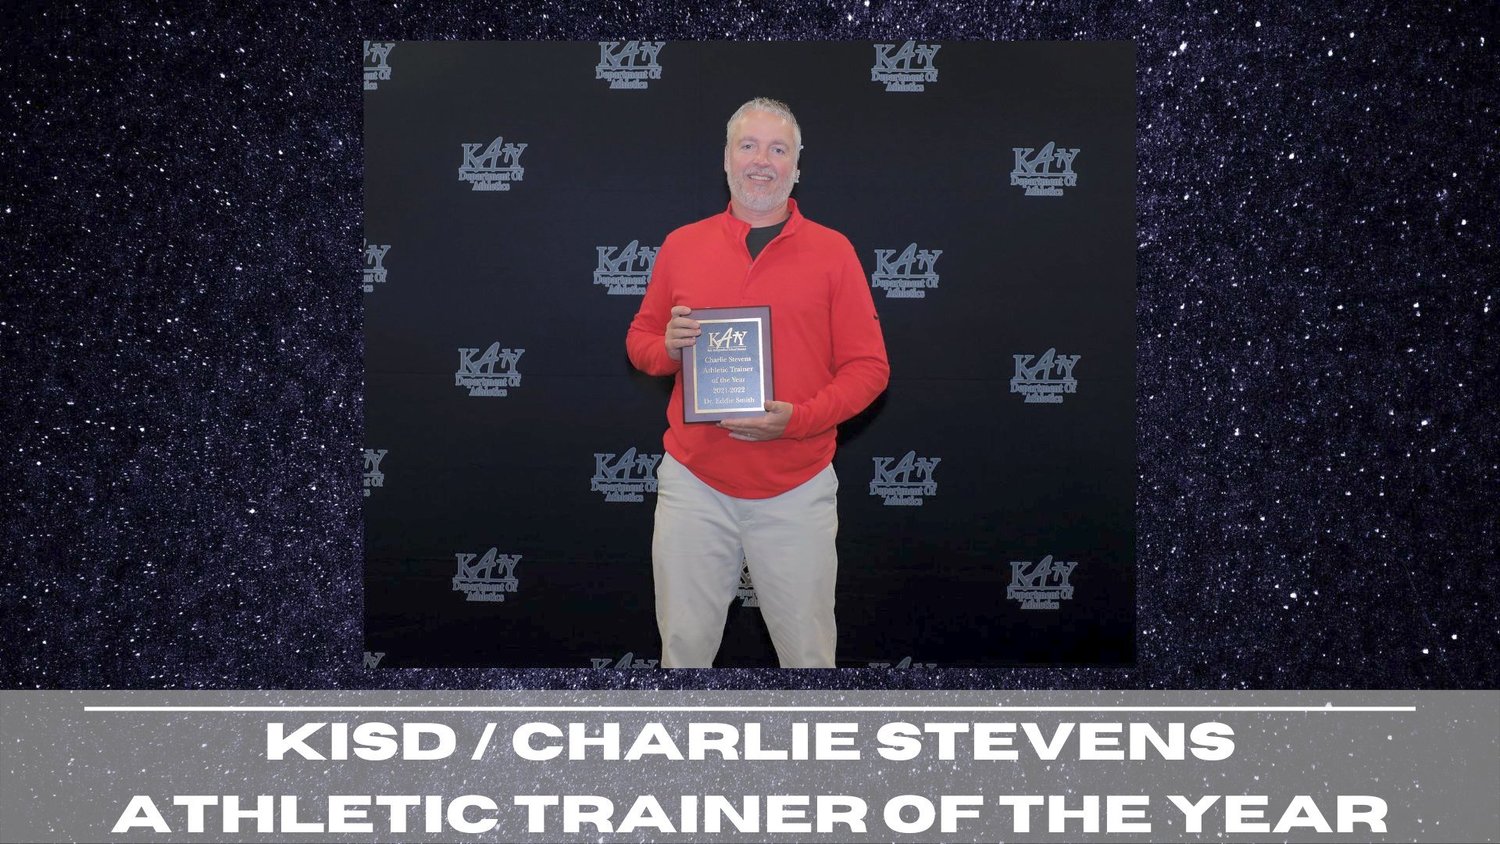 Katy’s Dr. Eddie Smith was named the Athletic Trainer of the Year.